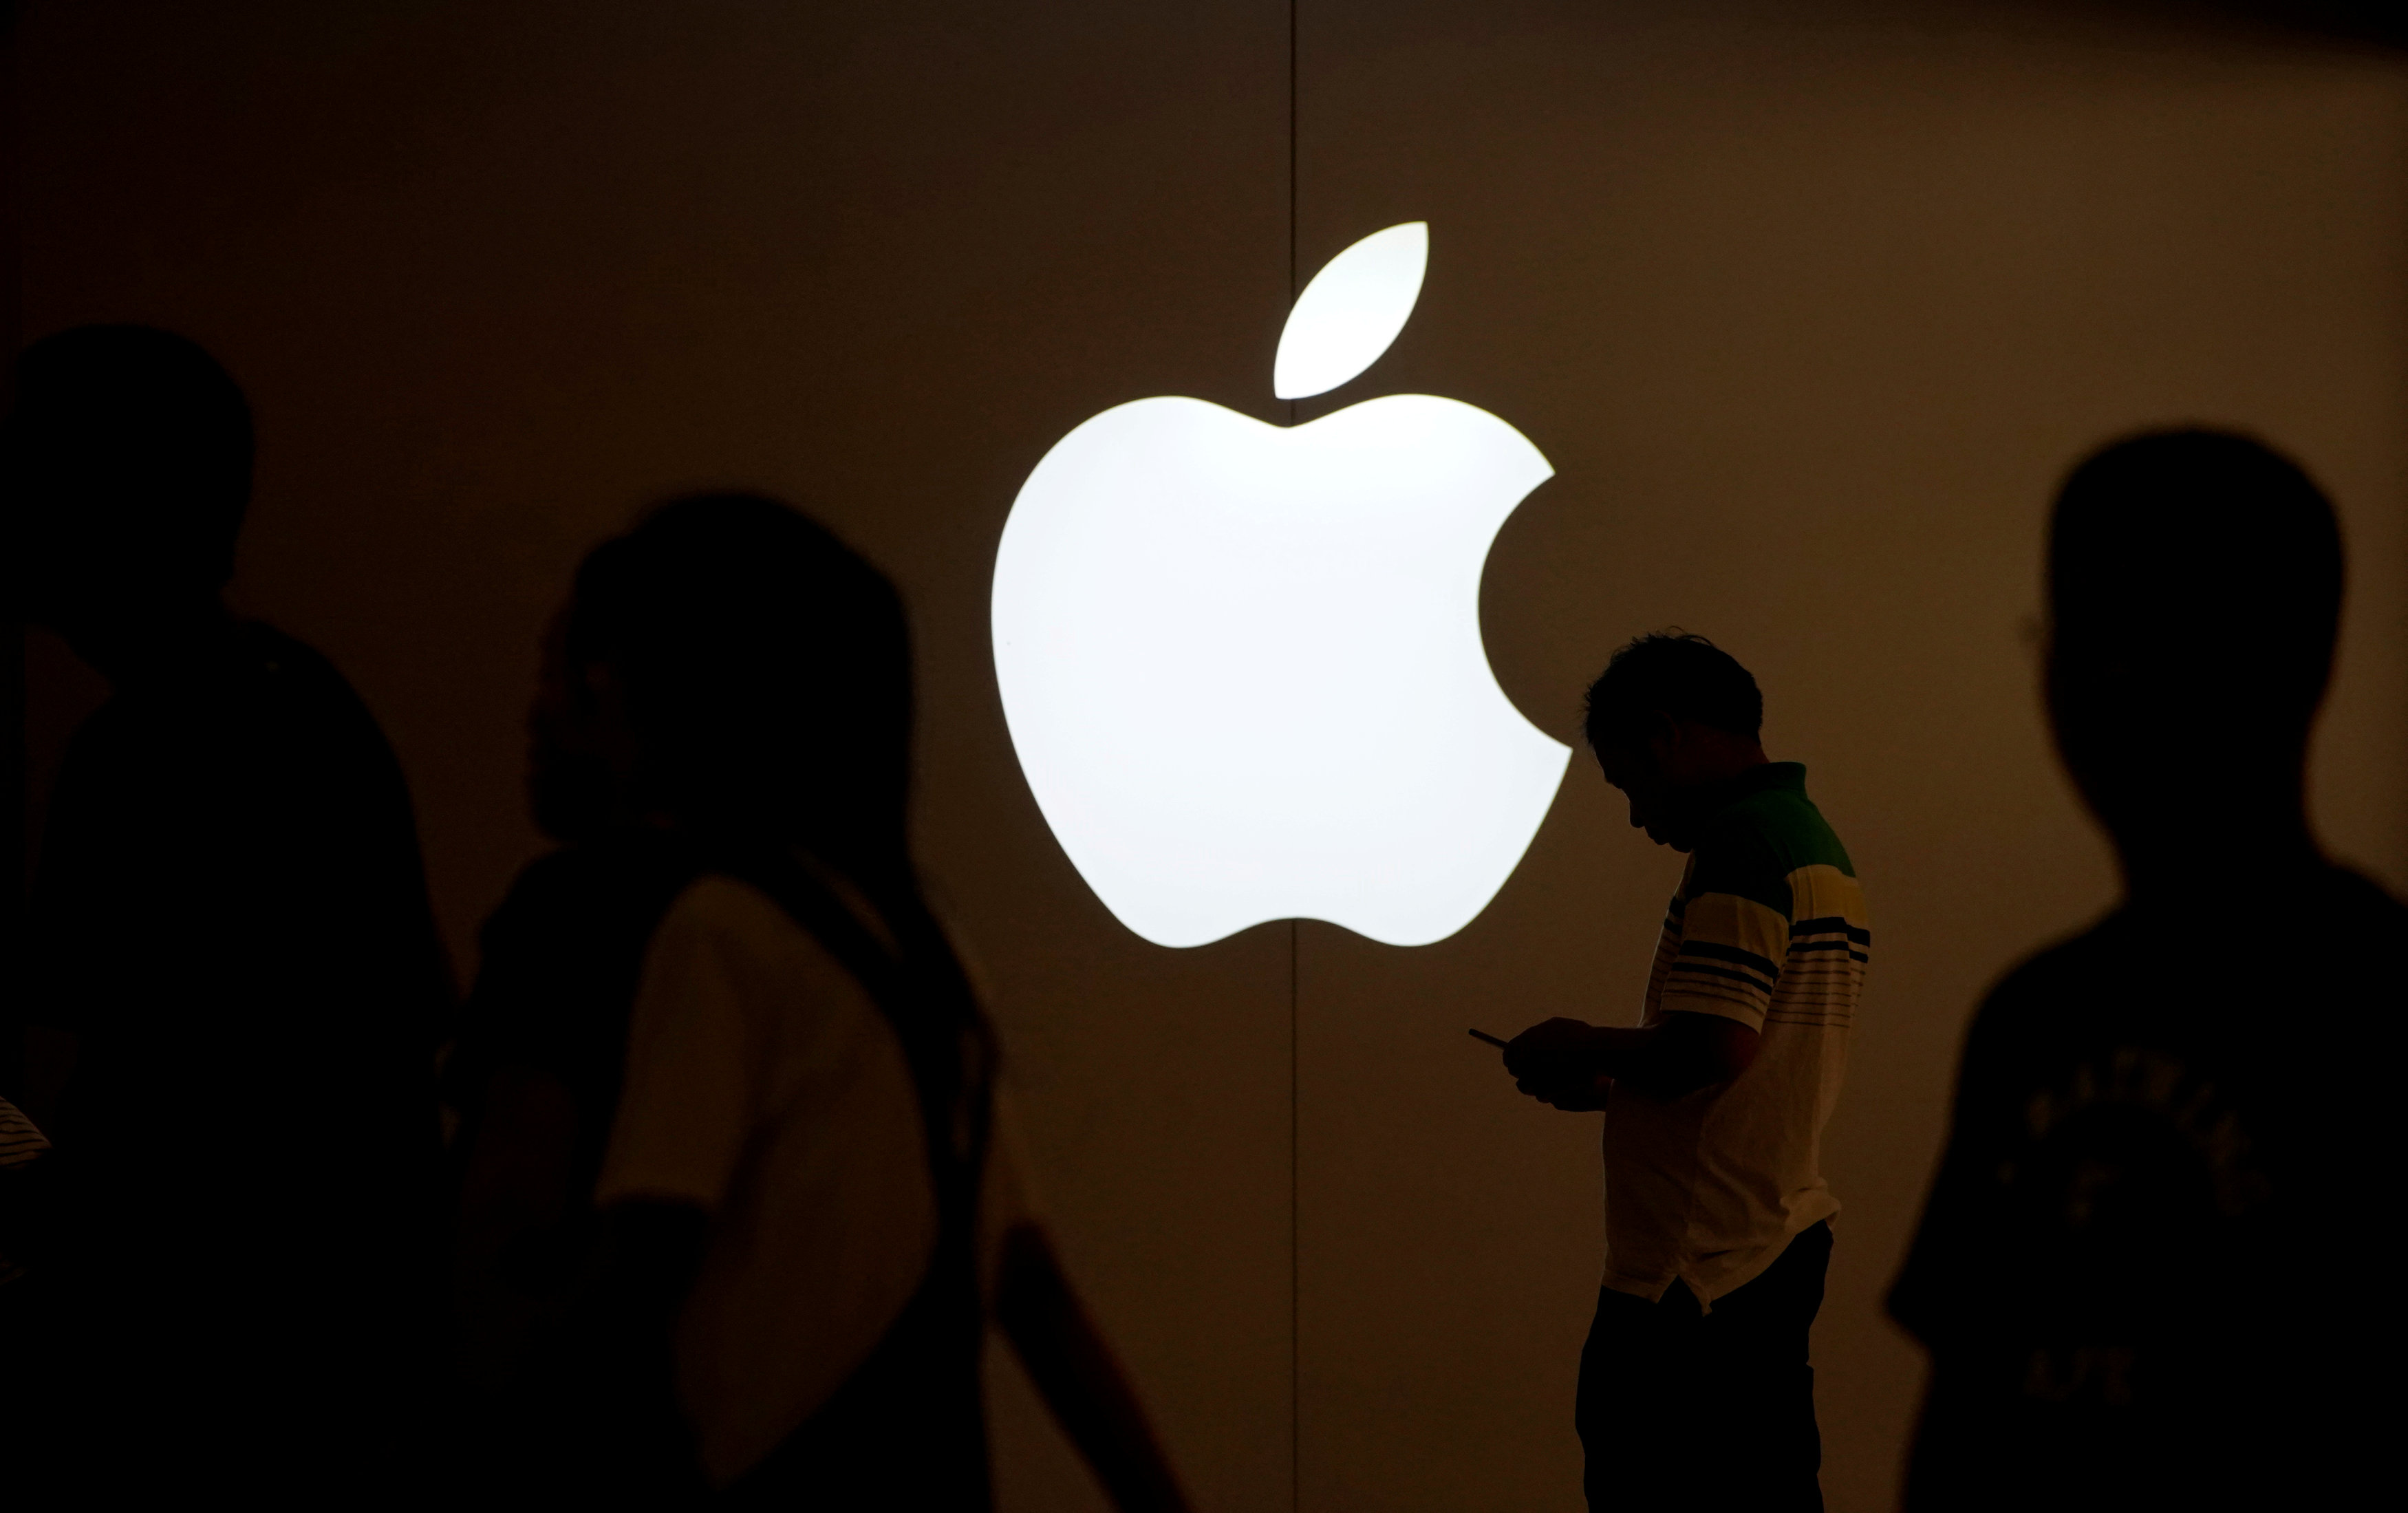 Apple set to unveil anniversary iPhone in major product launch